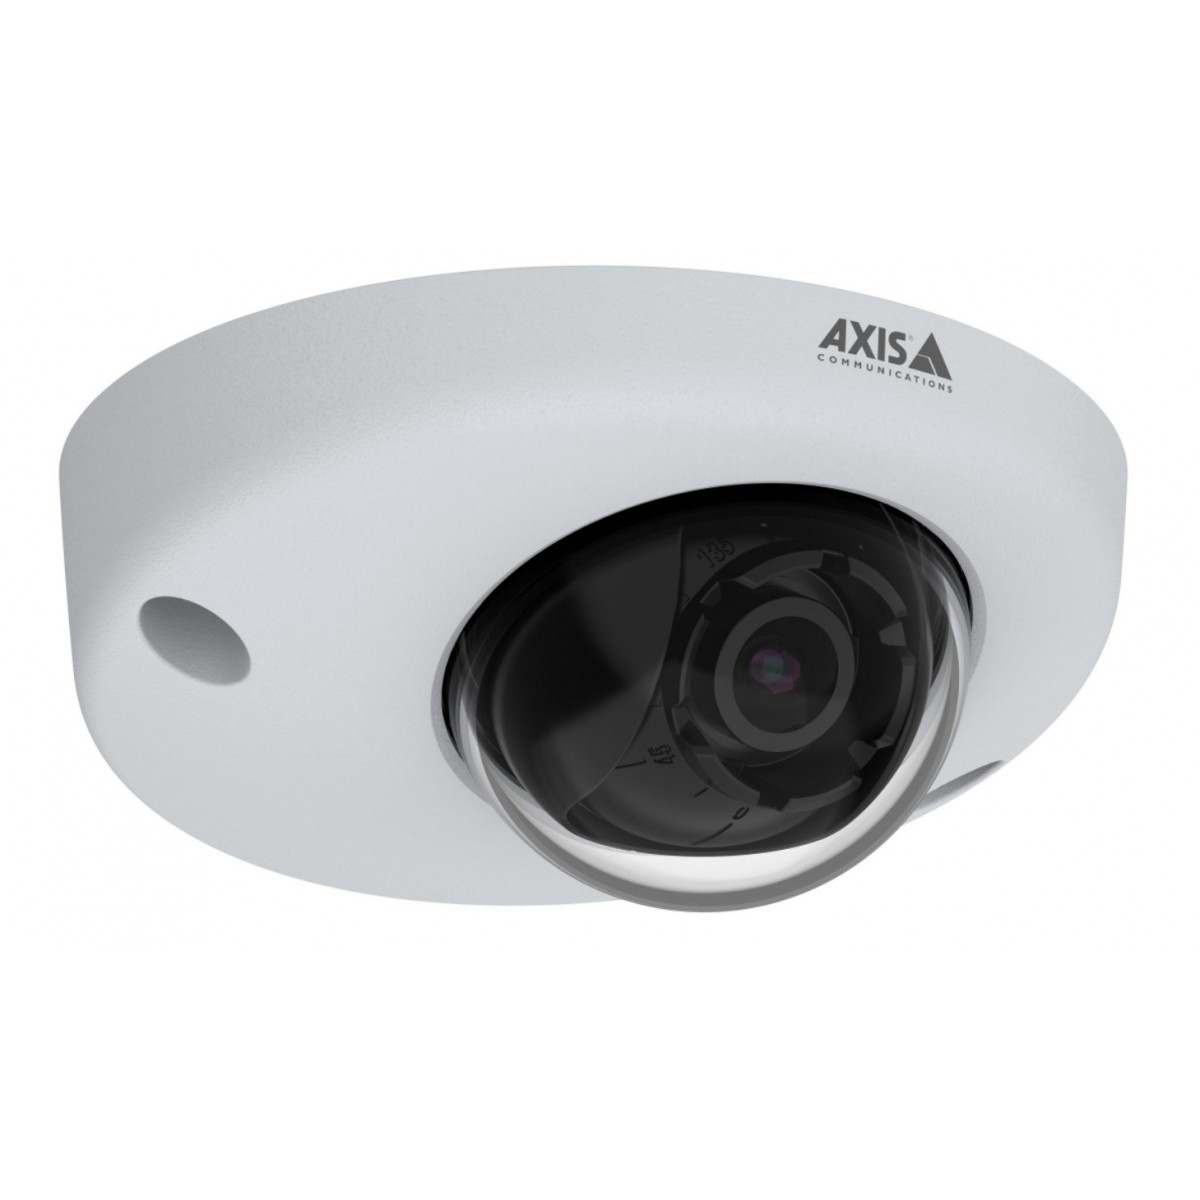 Axis P3925-R - IP security camera - Wired - Digital PTZ - Simplified Chinese - Traditional Chinese - German - English - Spanish 